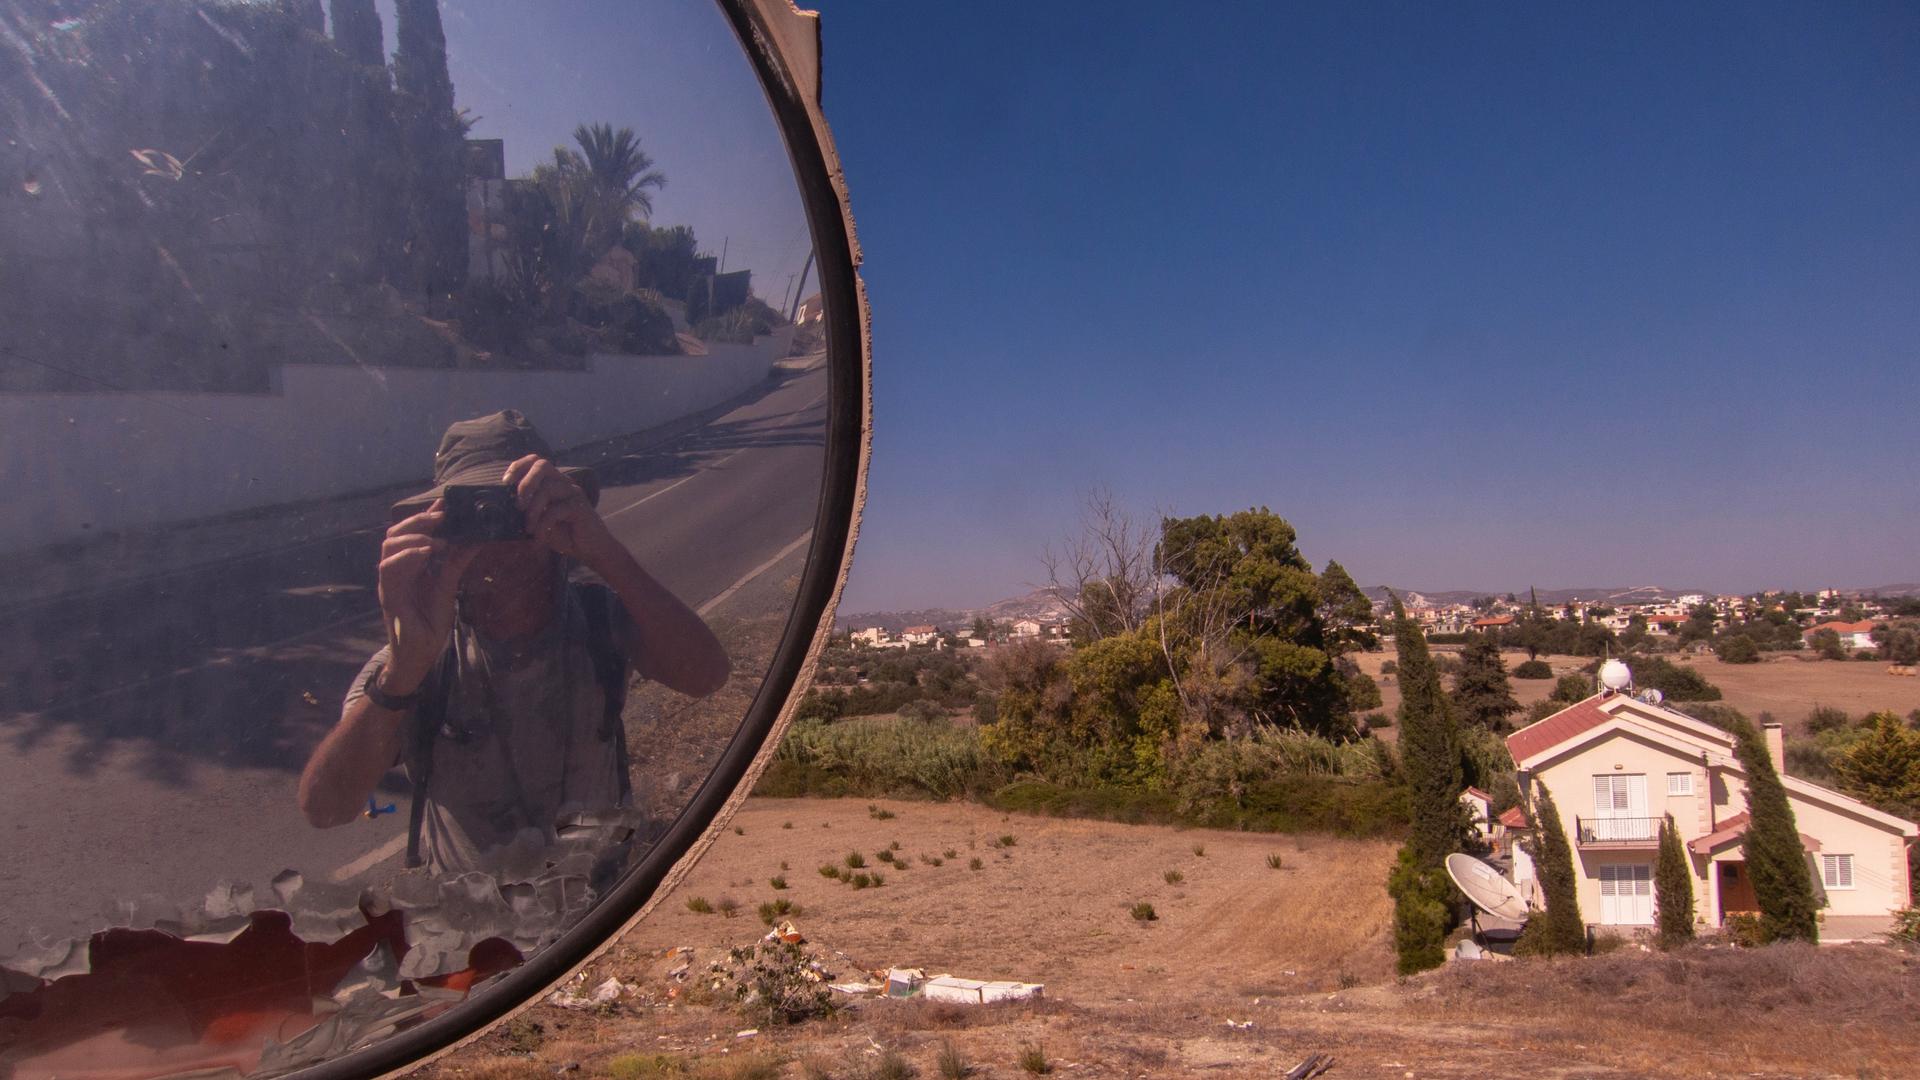 Man taking photo of self in mirror with a desert background